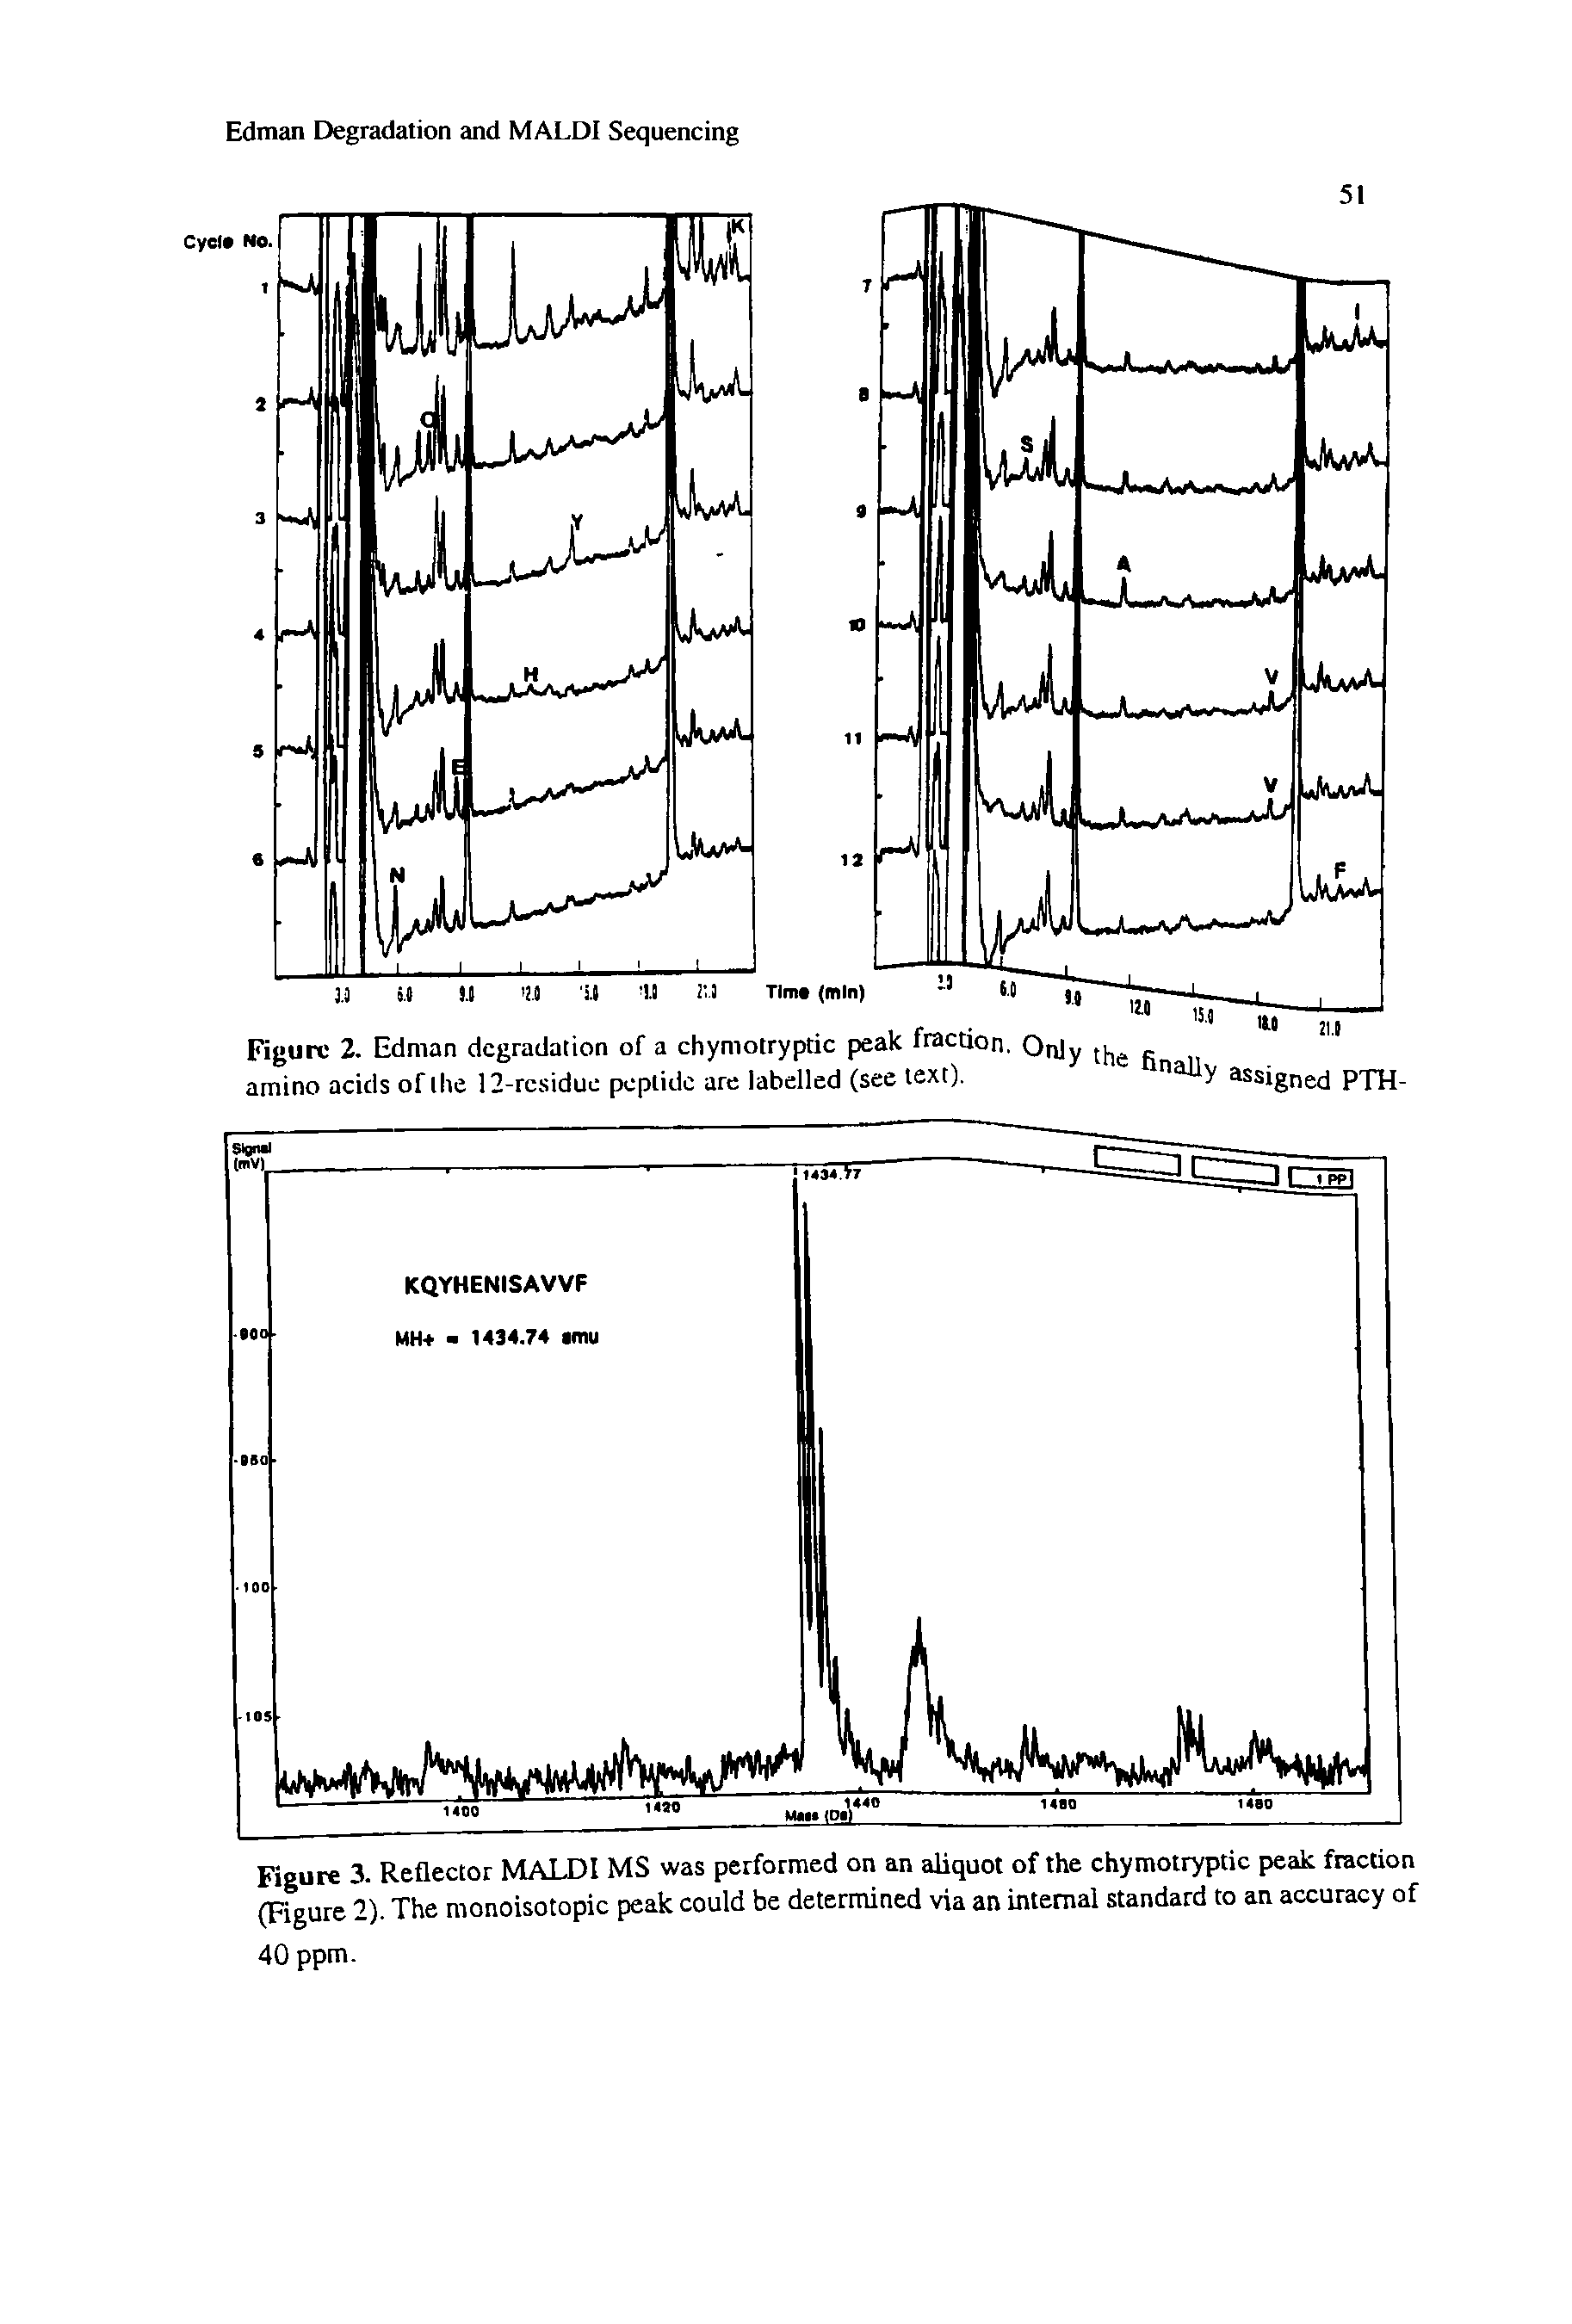 Figure 3. Reflector MALX)I MS was performed on an aliquot of the chymotryptic peak fraction (Figure 2). The monoisotopic peak could be determined via an internal standard to an accuracy of 40 ppm.